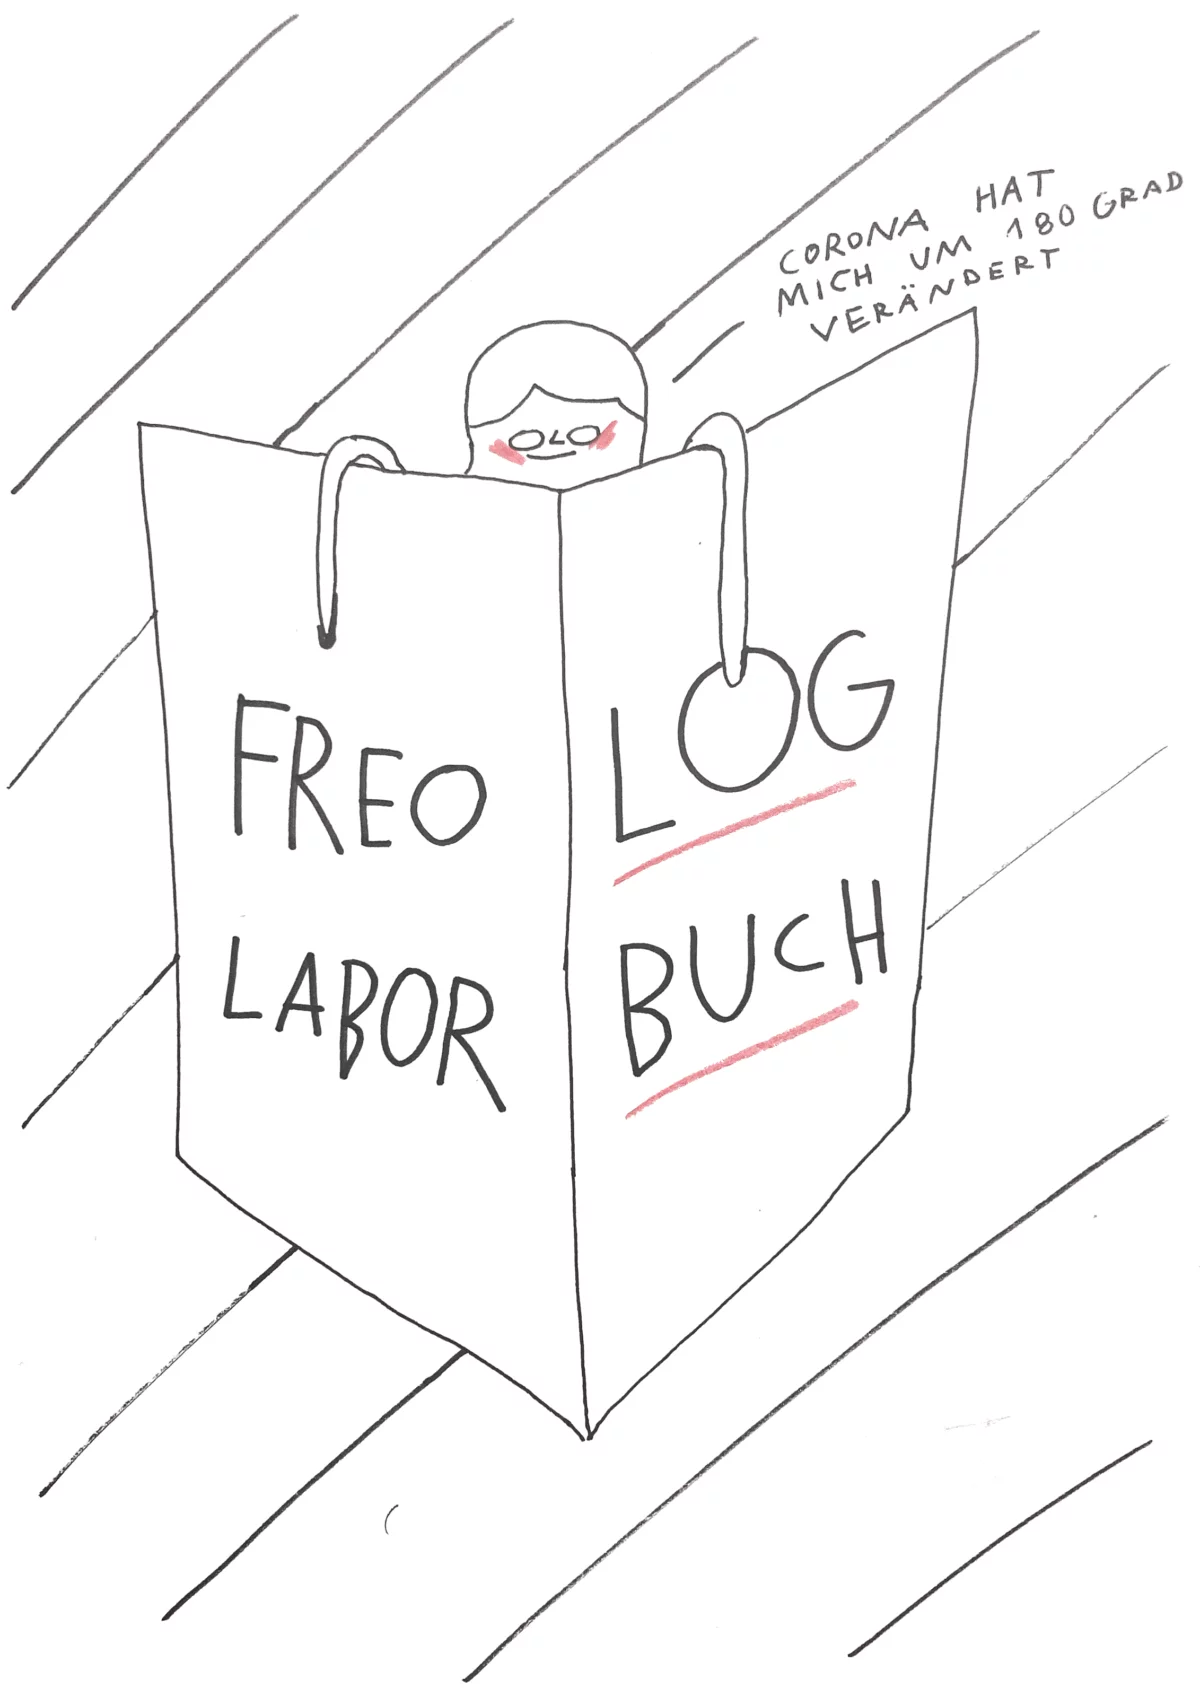 A drawing shows a book placed on edge. On the spine of the book it says "Freo Labor - Logbook". On the inside of the book, looking over the top edge of the book, is figure. Next to it is the sentence "Corona has changed me 180 degrees".